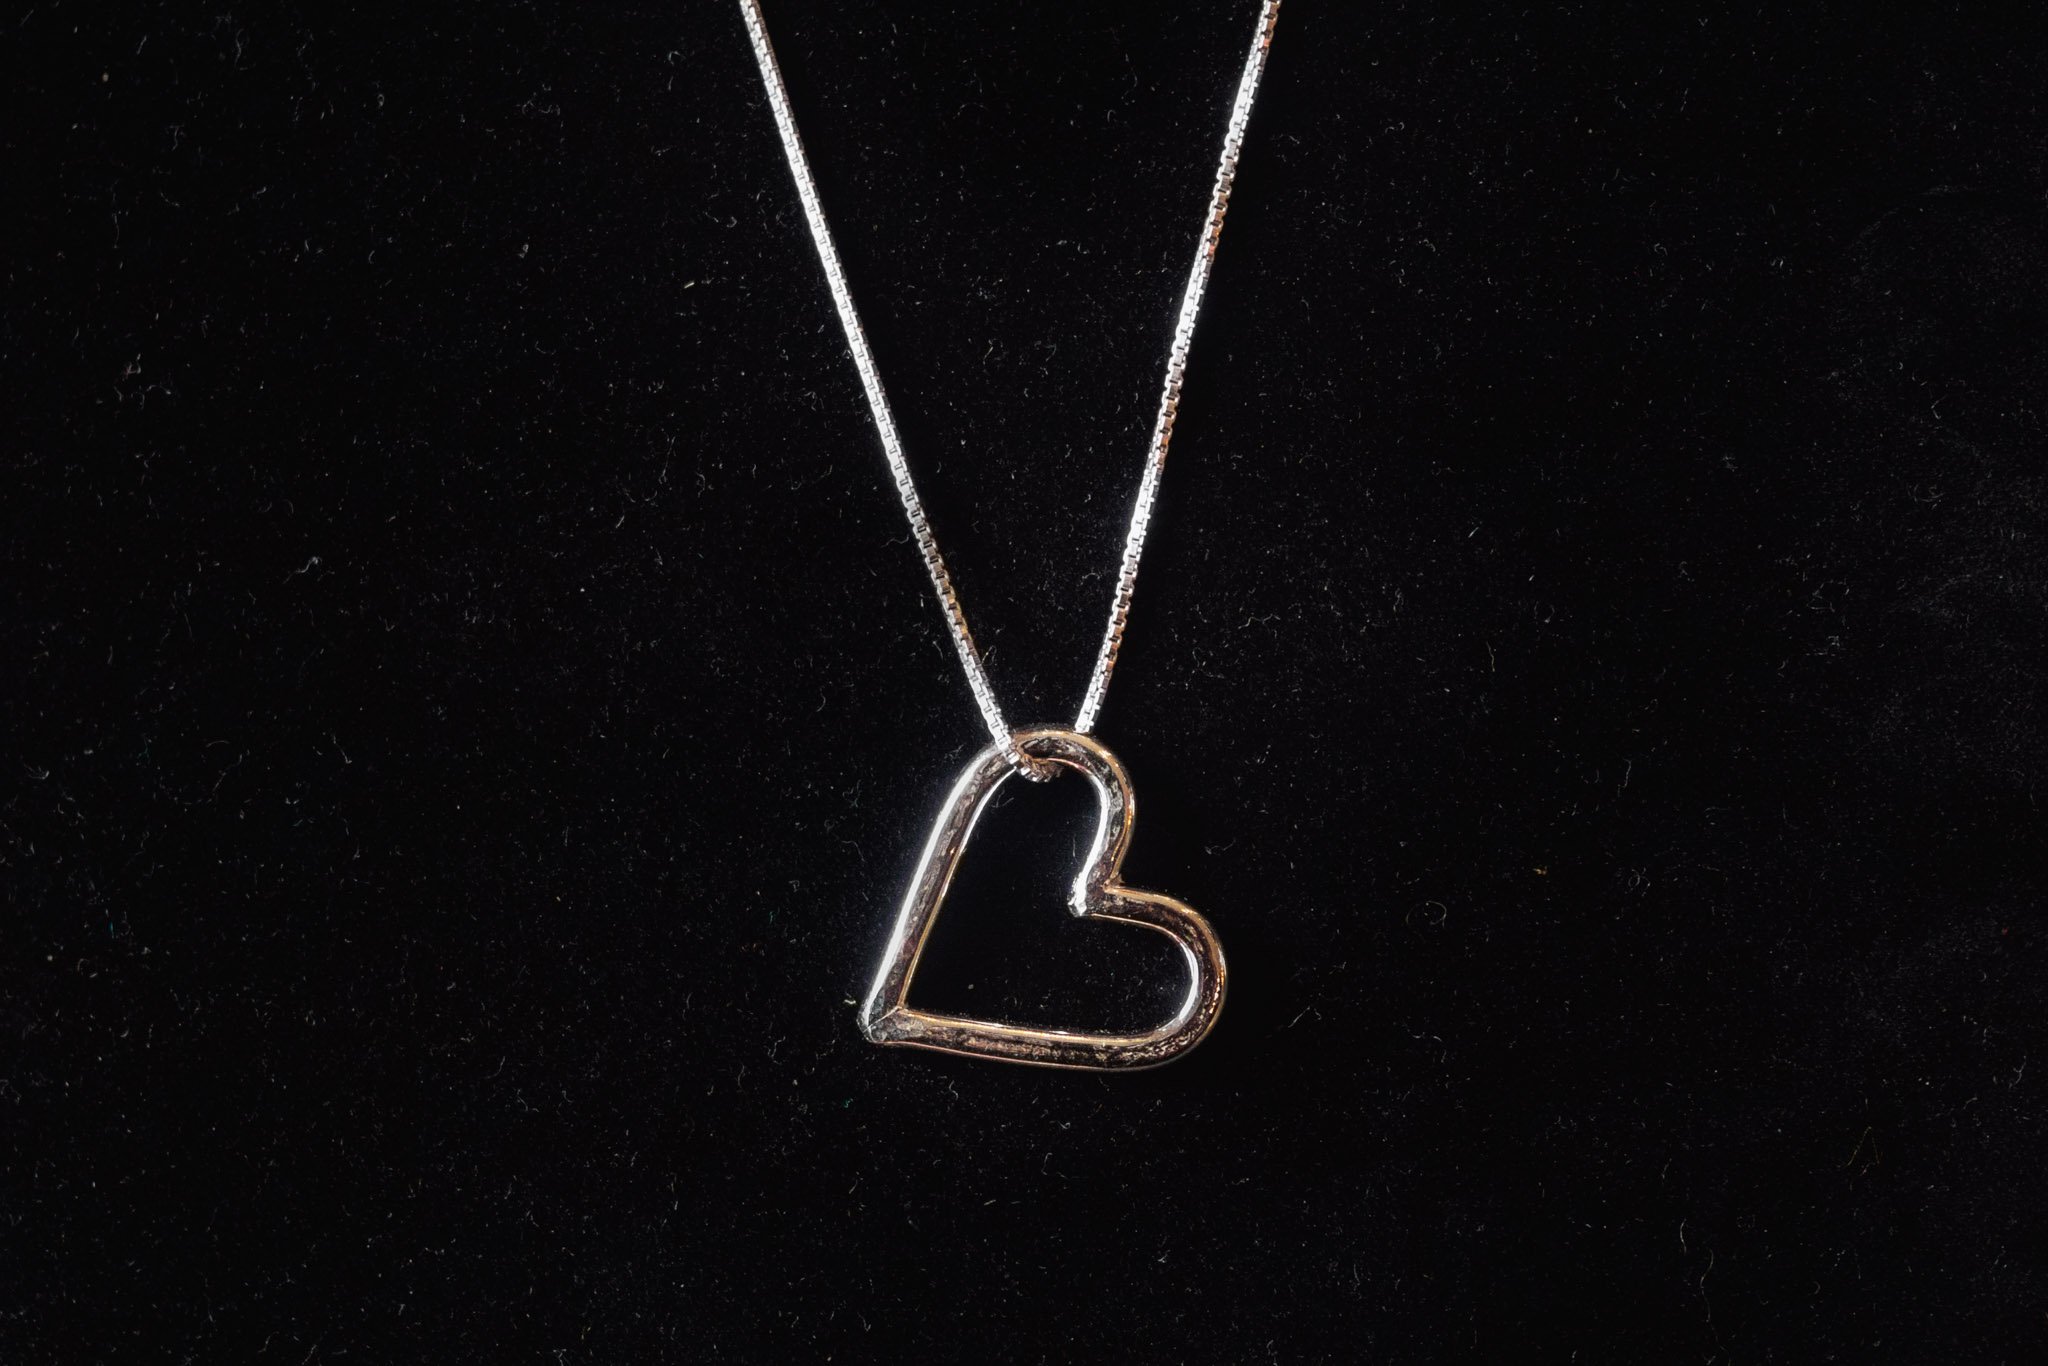 Silver Floating Heart Necklace by Elements Gallery